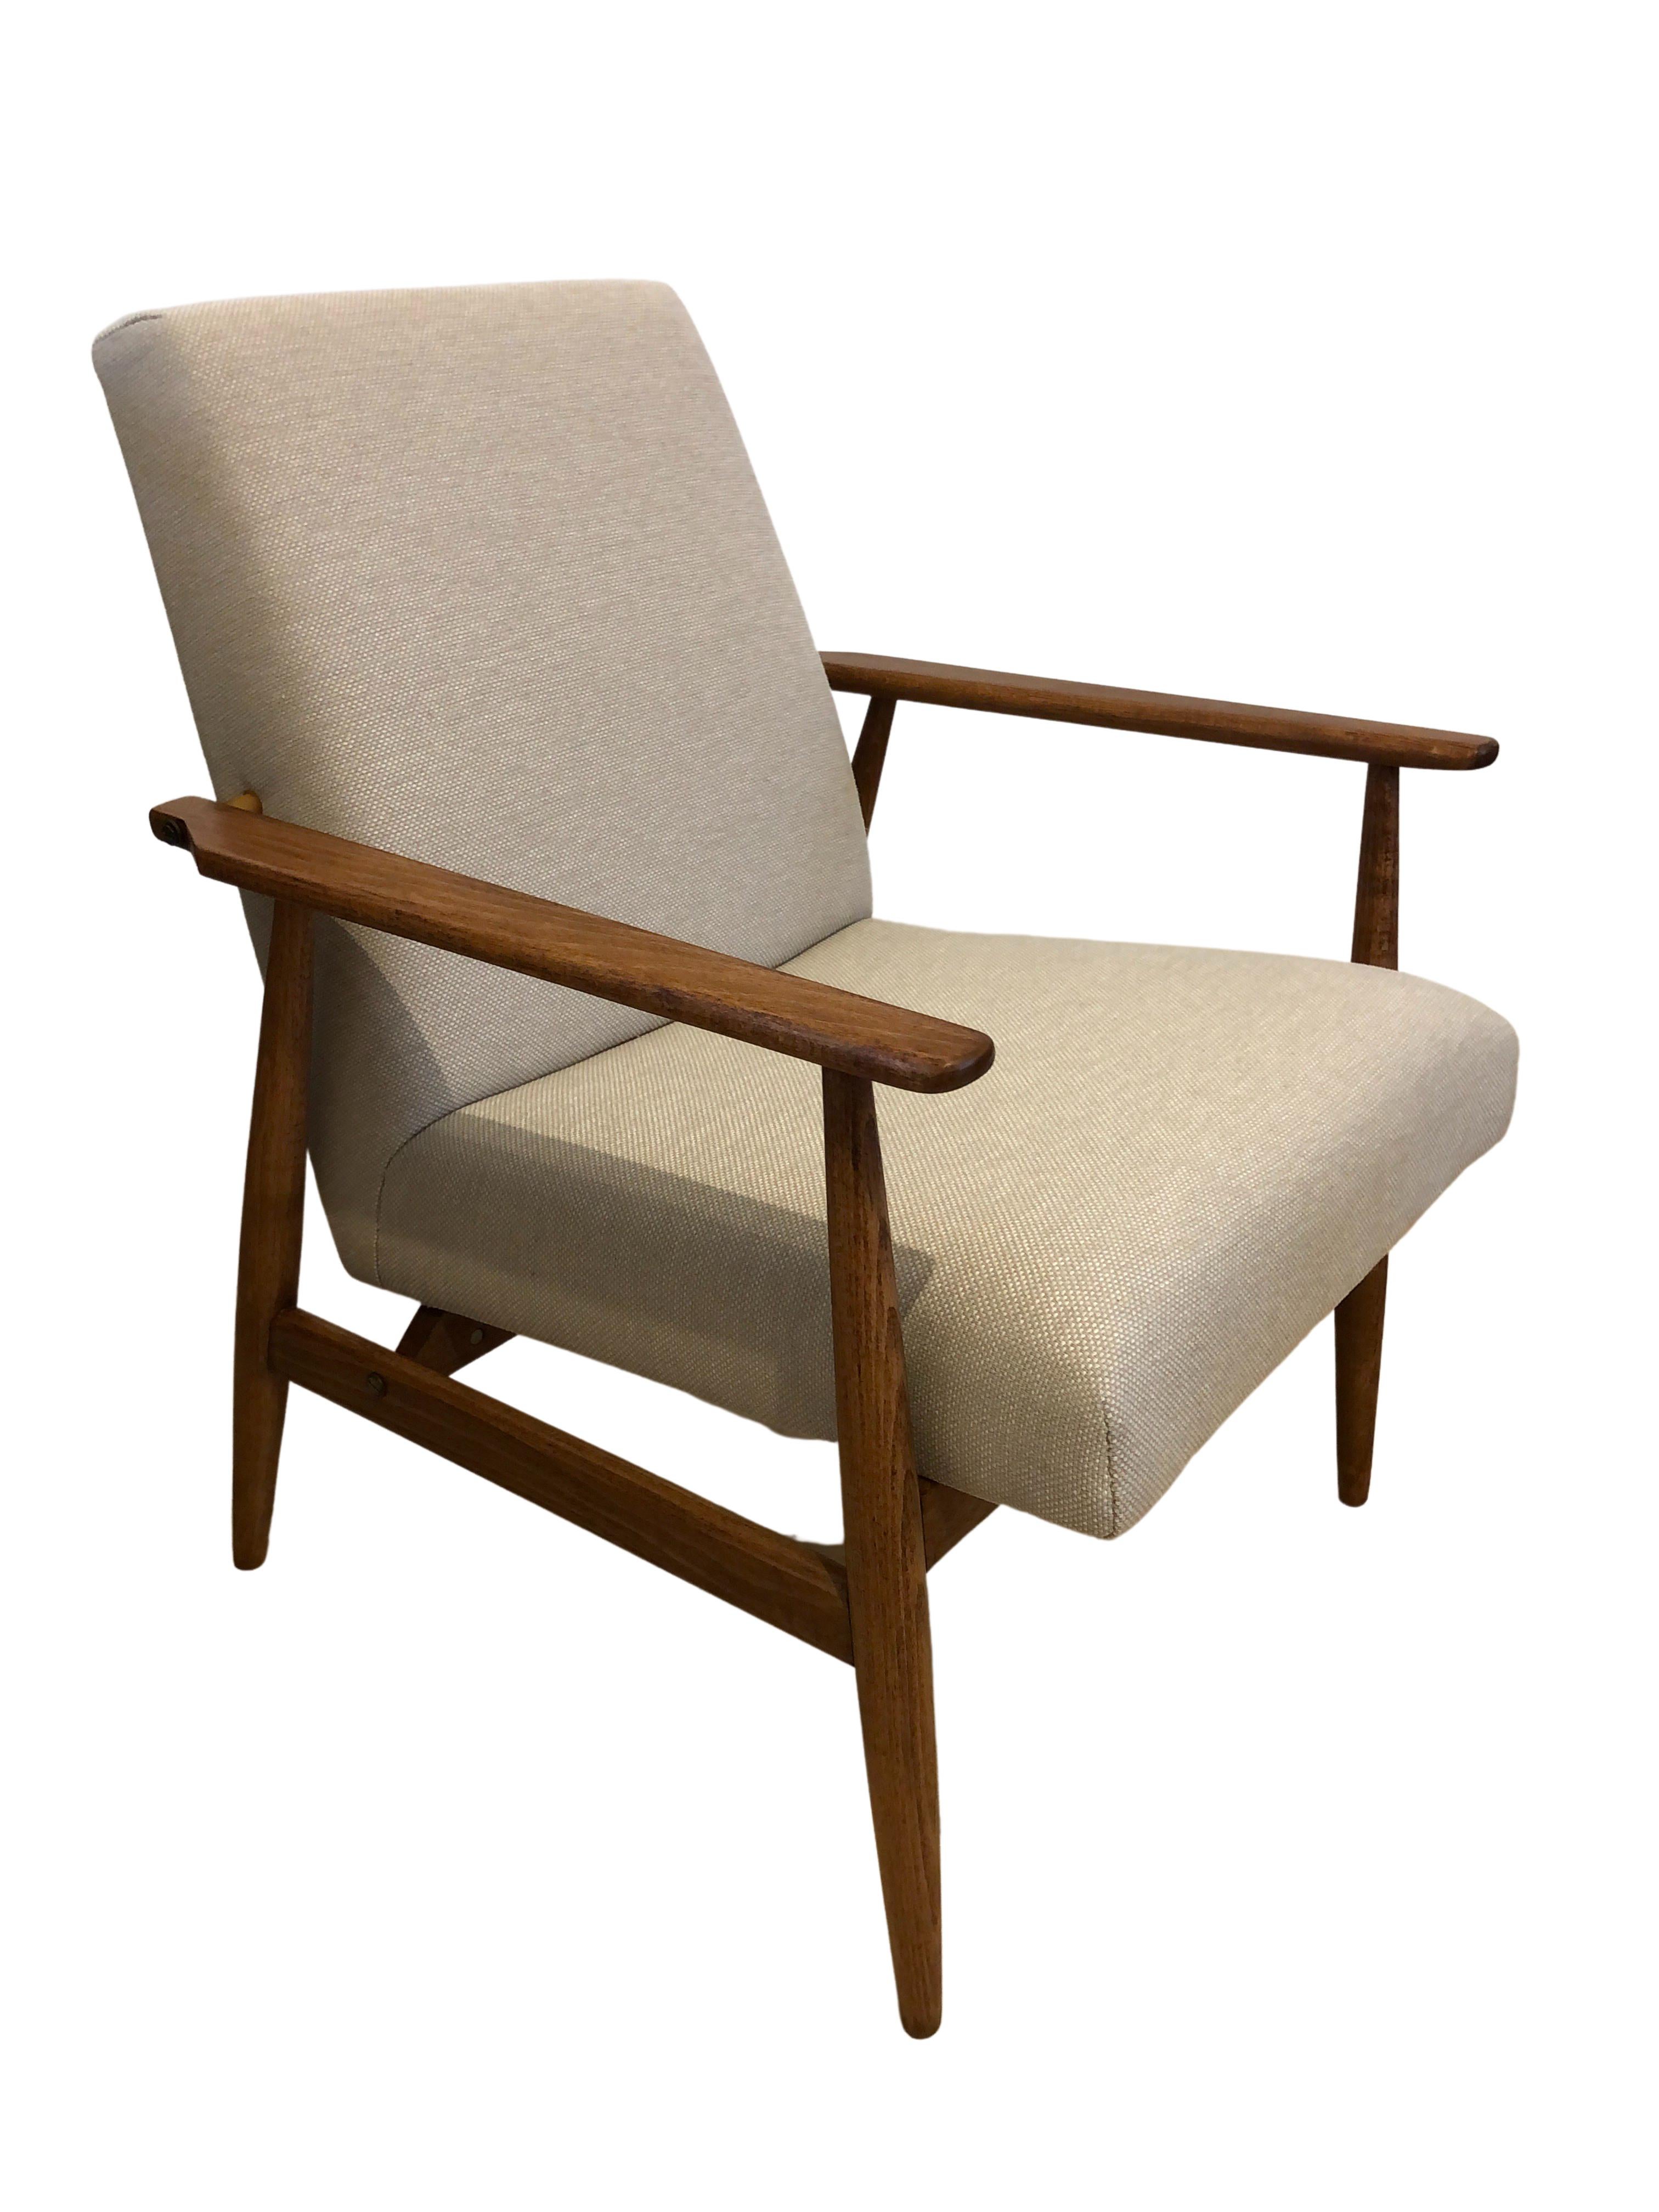 The set of two armchairs designed by Henryk Lis. The structure is made of beech wood in a warm walnut color, finished with a semi-matte satin varnish. The upholstery is heavy weight cotton and linen fabric in a beige color. The set has been